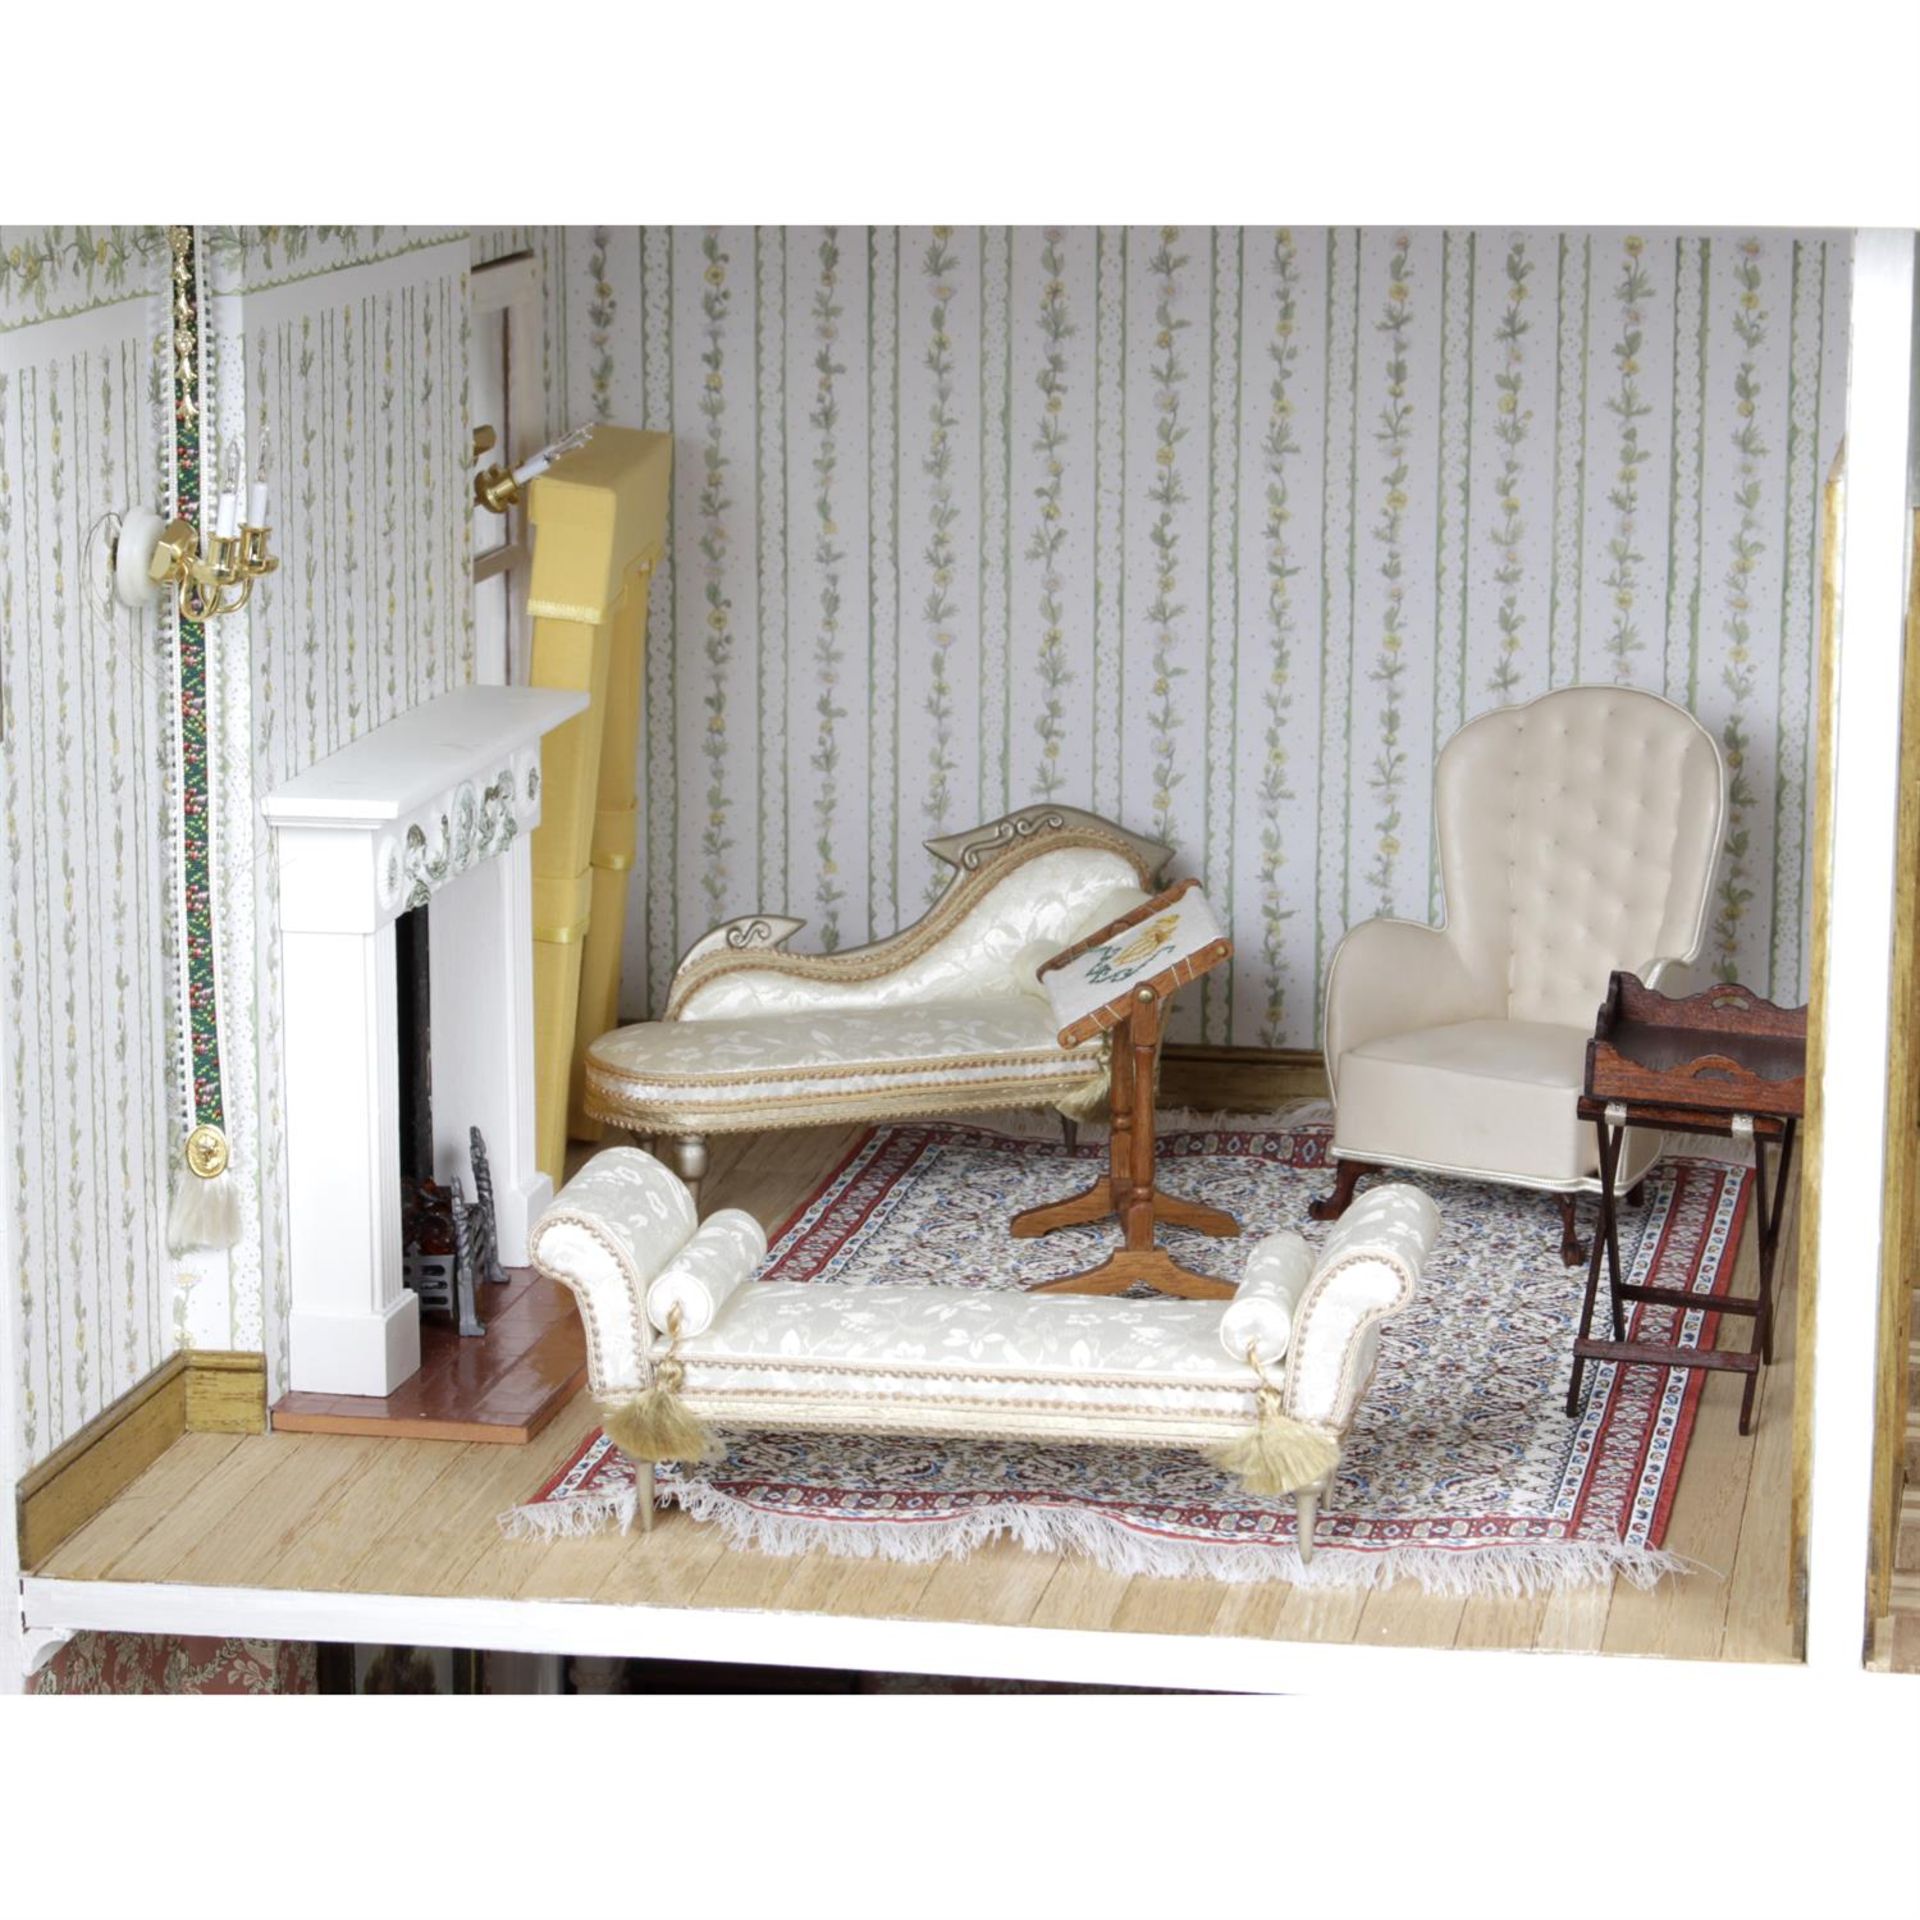 A large wooden dolls house. - Image 2 of 8